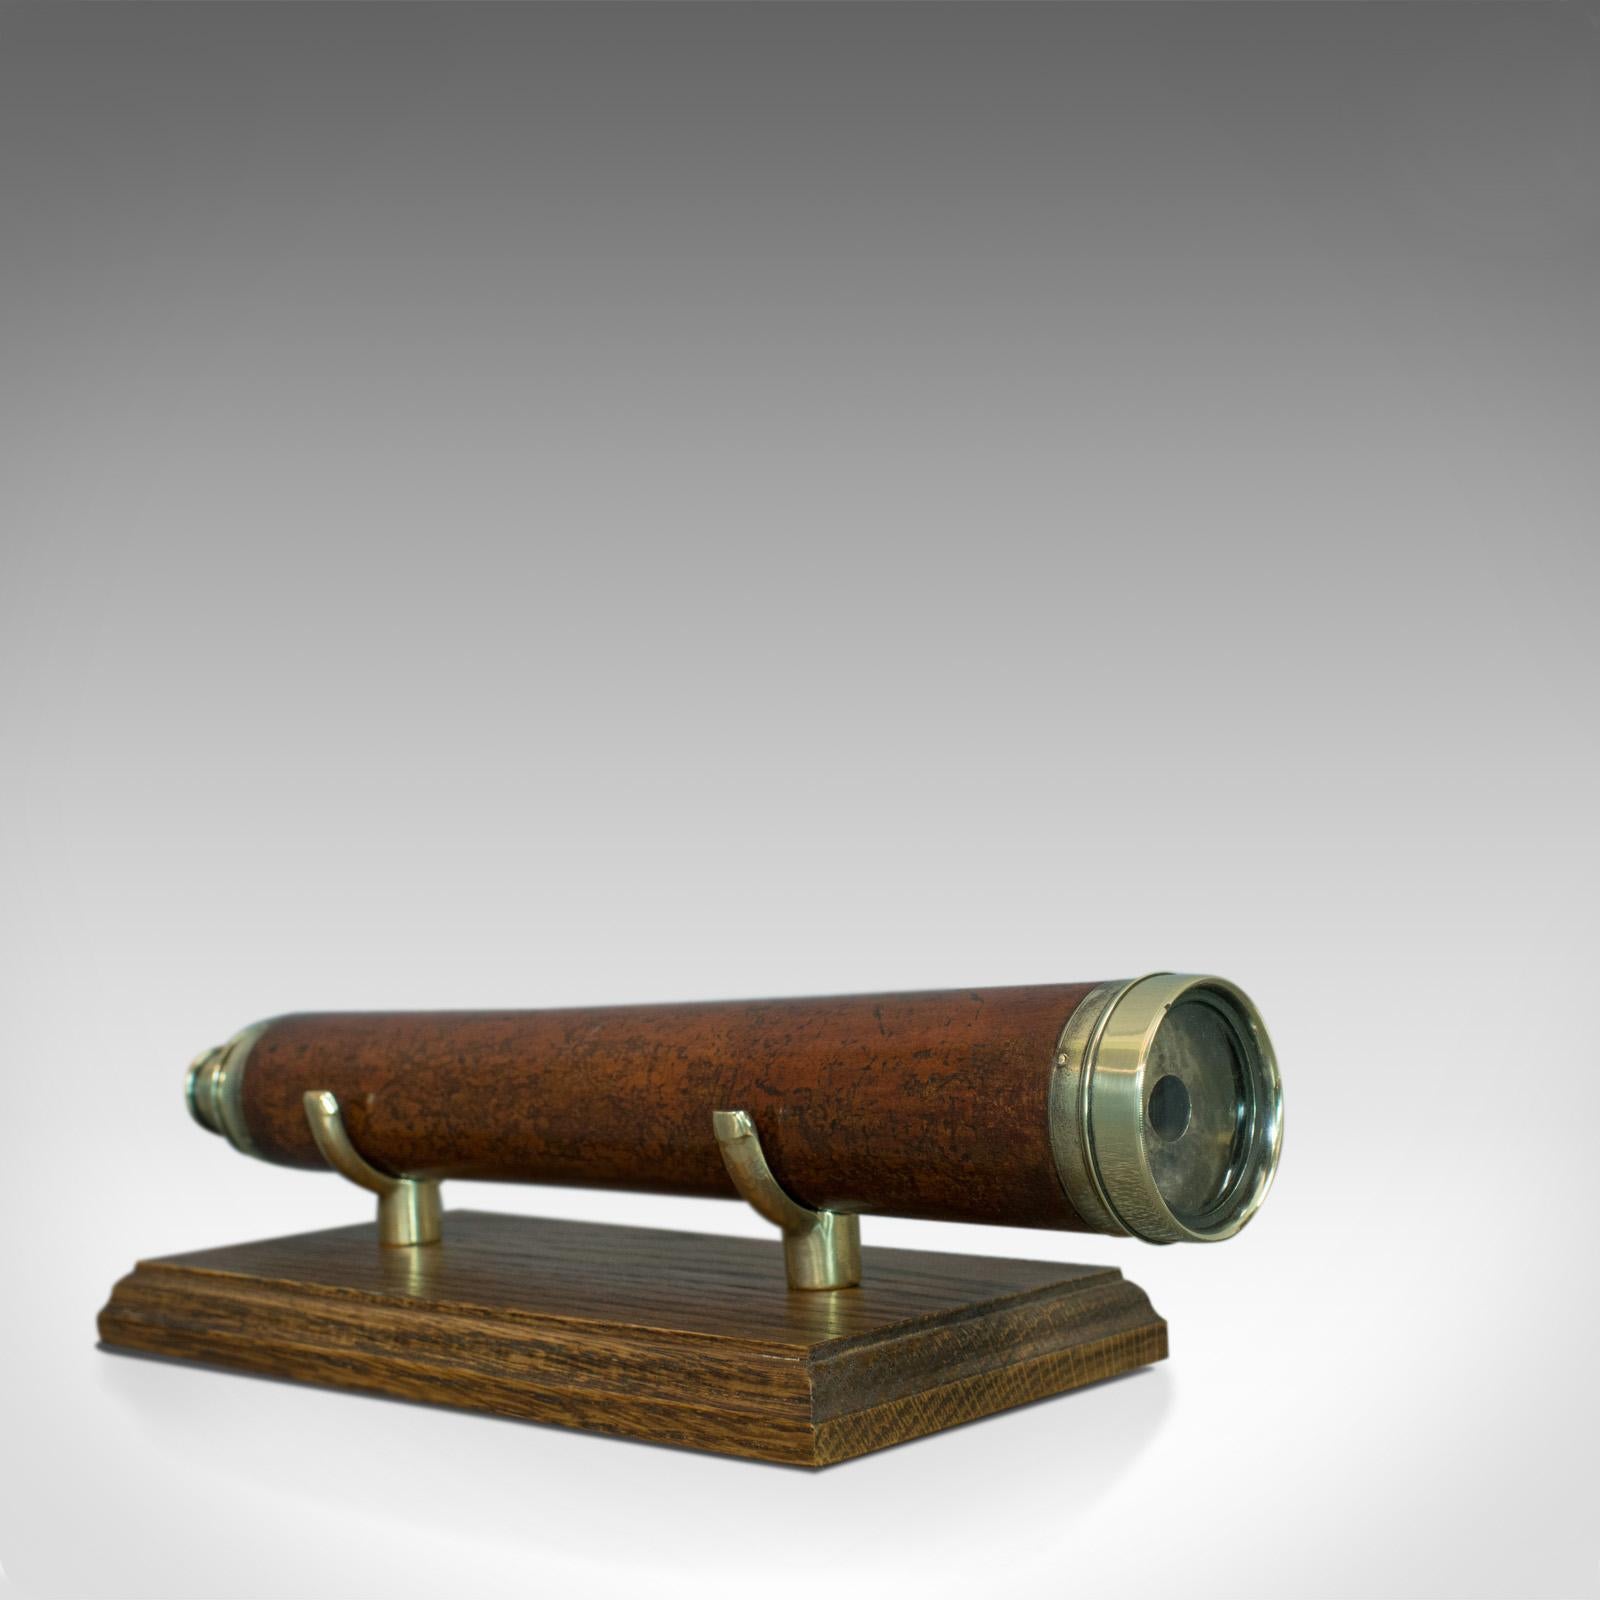 This is an antique telescope, a two-draw refractor for terrestrial or astronomical use. An English telescope dating to the mid-Georgian period of the 18th century, circa 1760.

Perfect for bird watching, landscape appreciation, wildlife stalking,